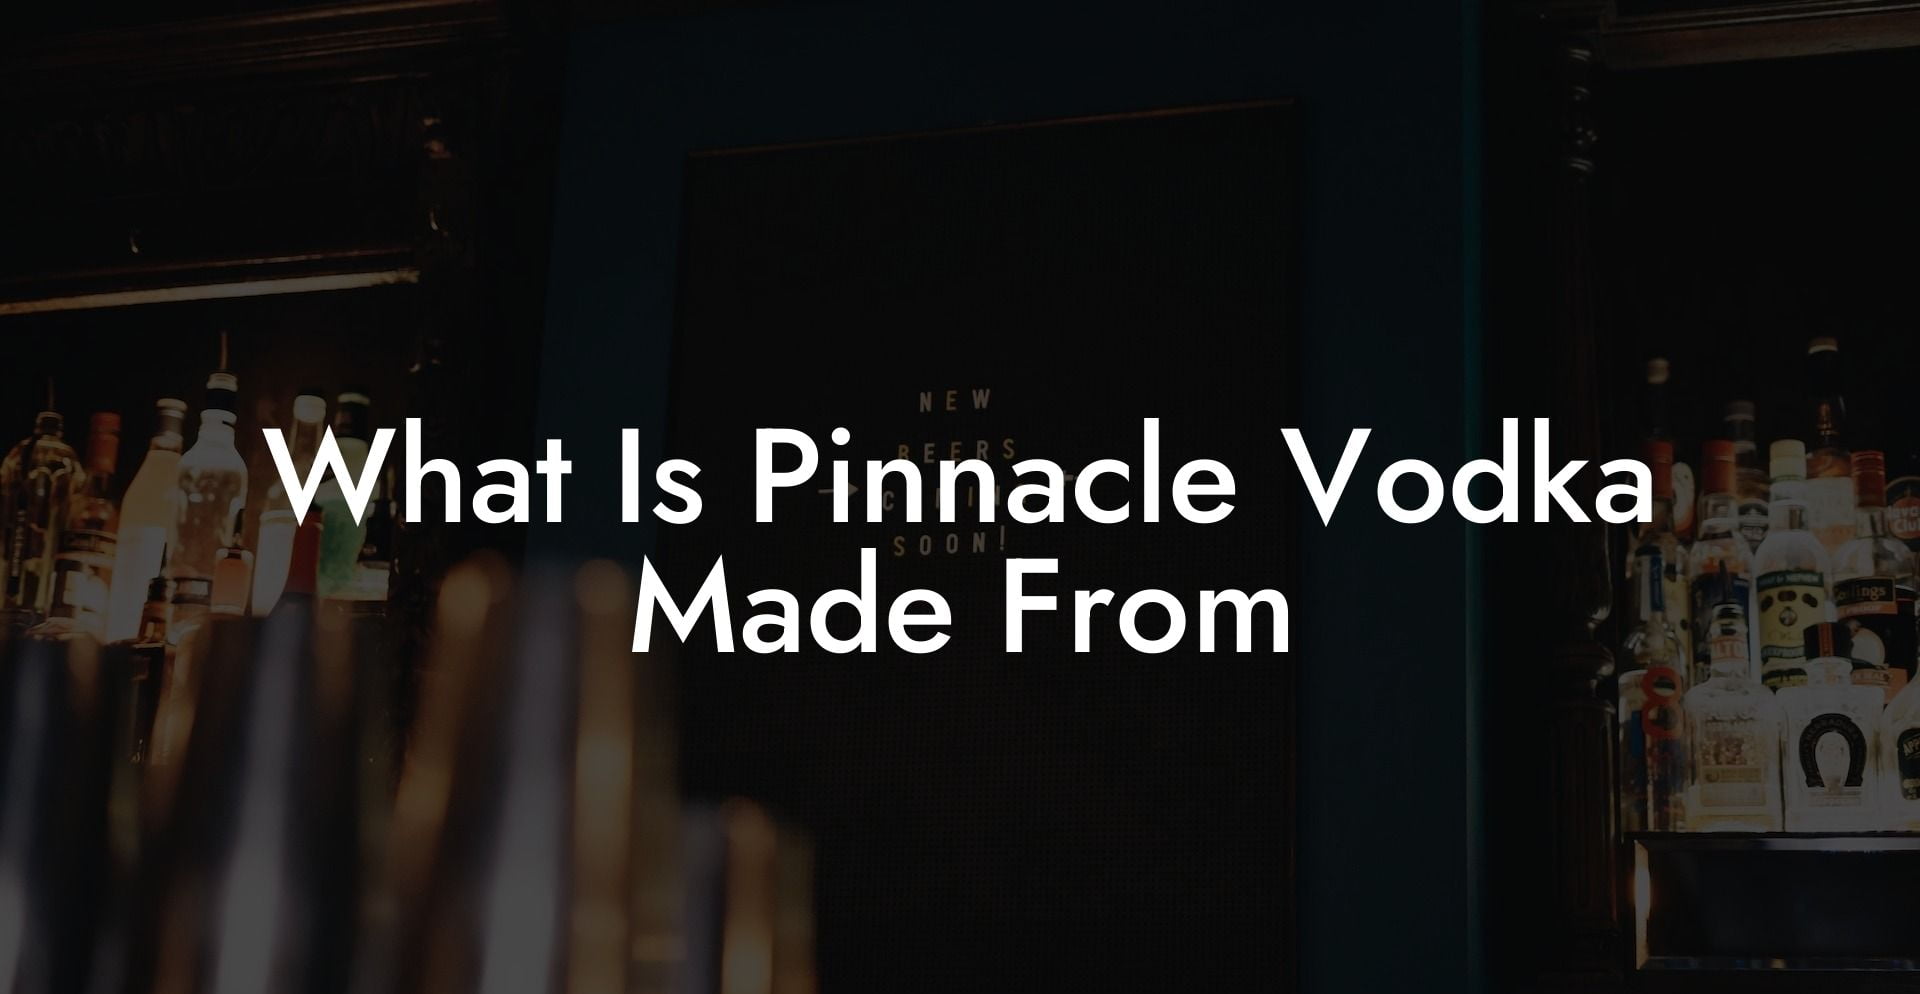 What Is Pinnacle Vodka Made From